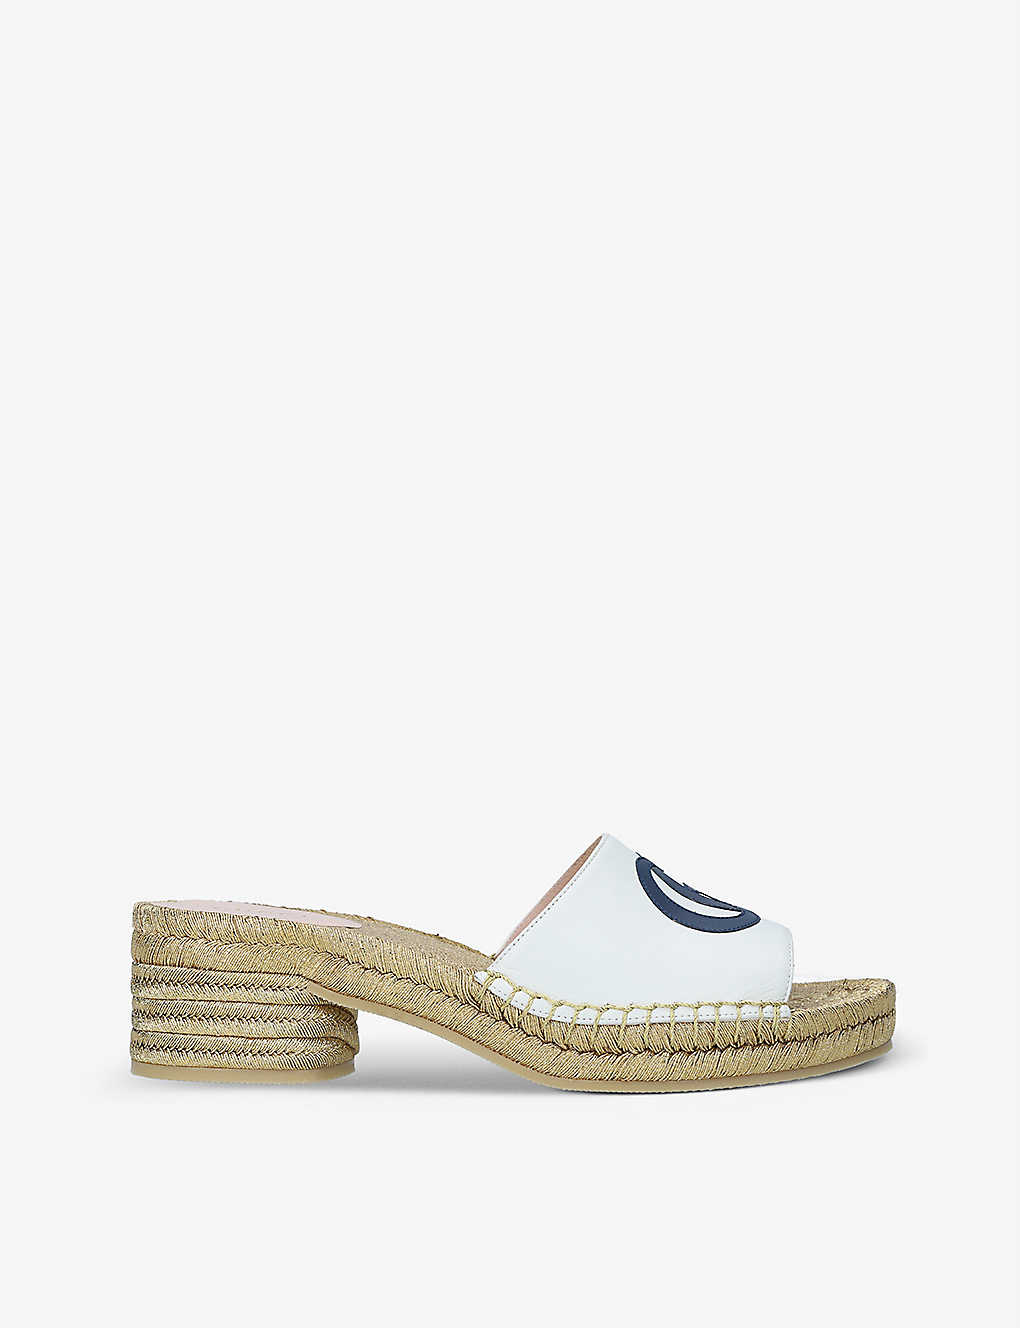 GG-embossed leather espadrille sandals(9353746)